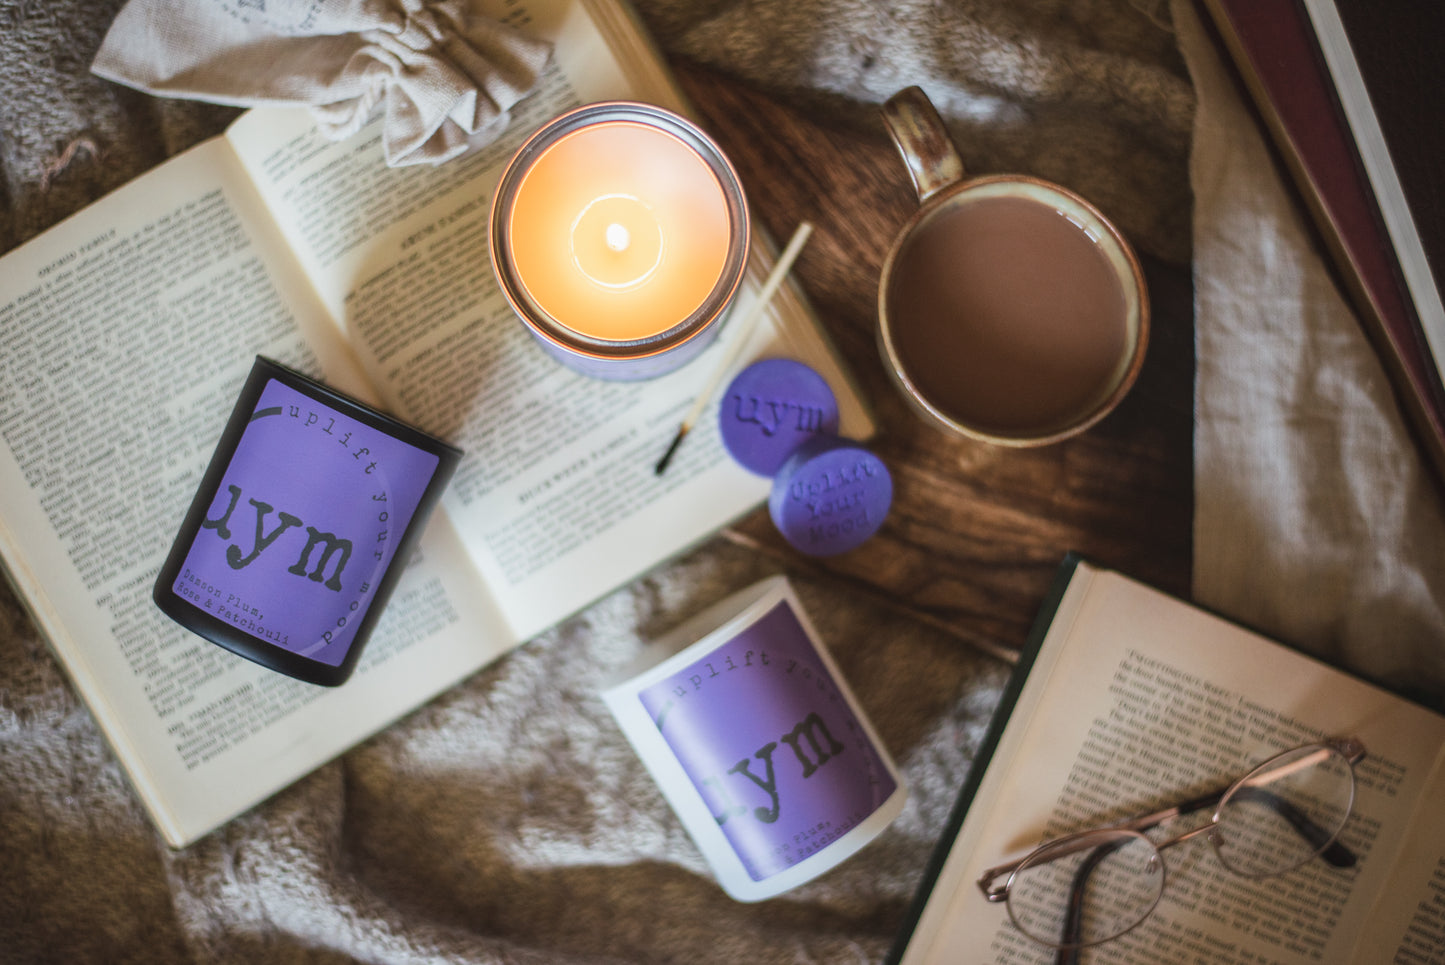 Damson Plum, Rose & Patchouli Candles, highly sceted natural wax, organic cotton wick, metallic tin lighted candle, cosy background. Uplift Your Mood Scents